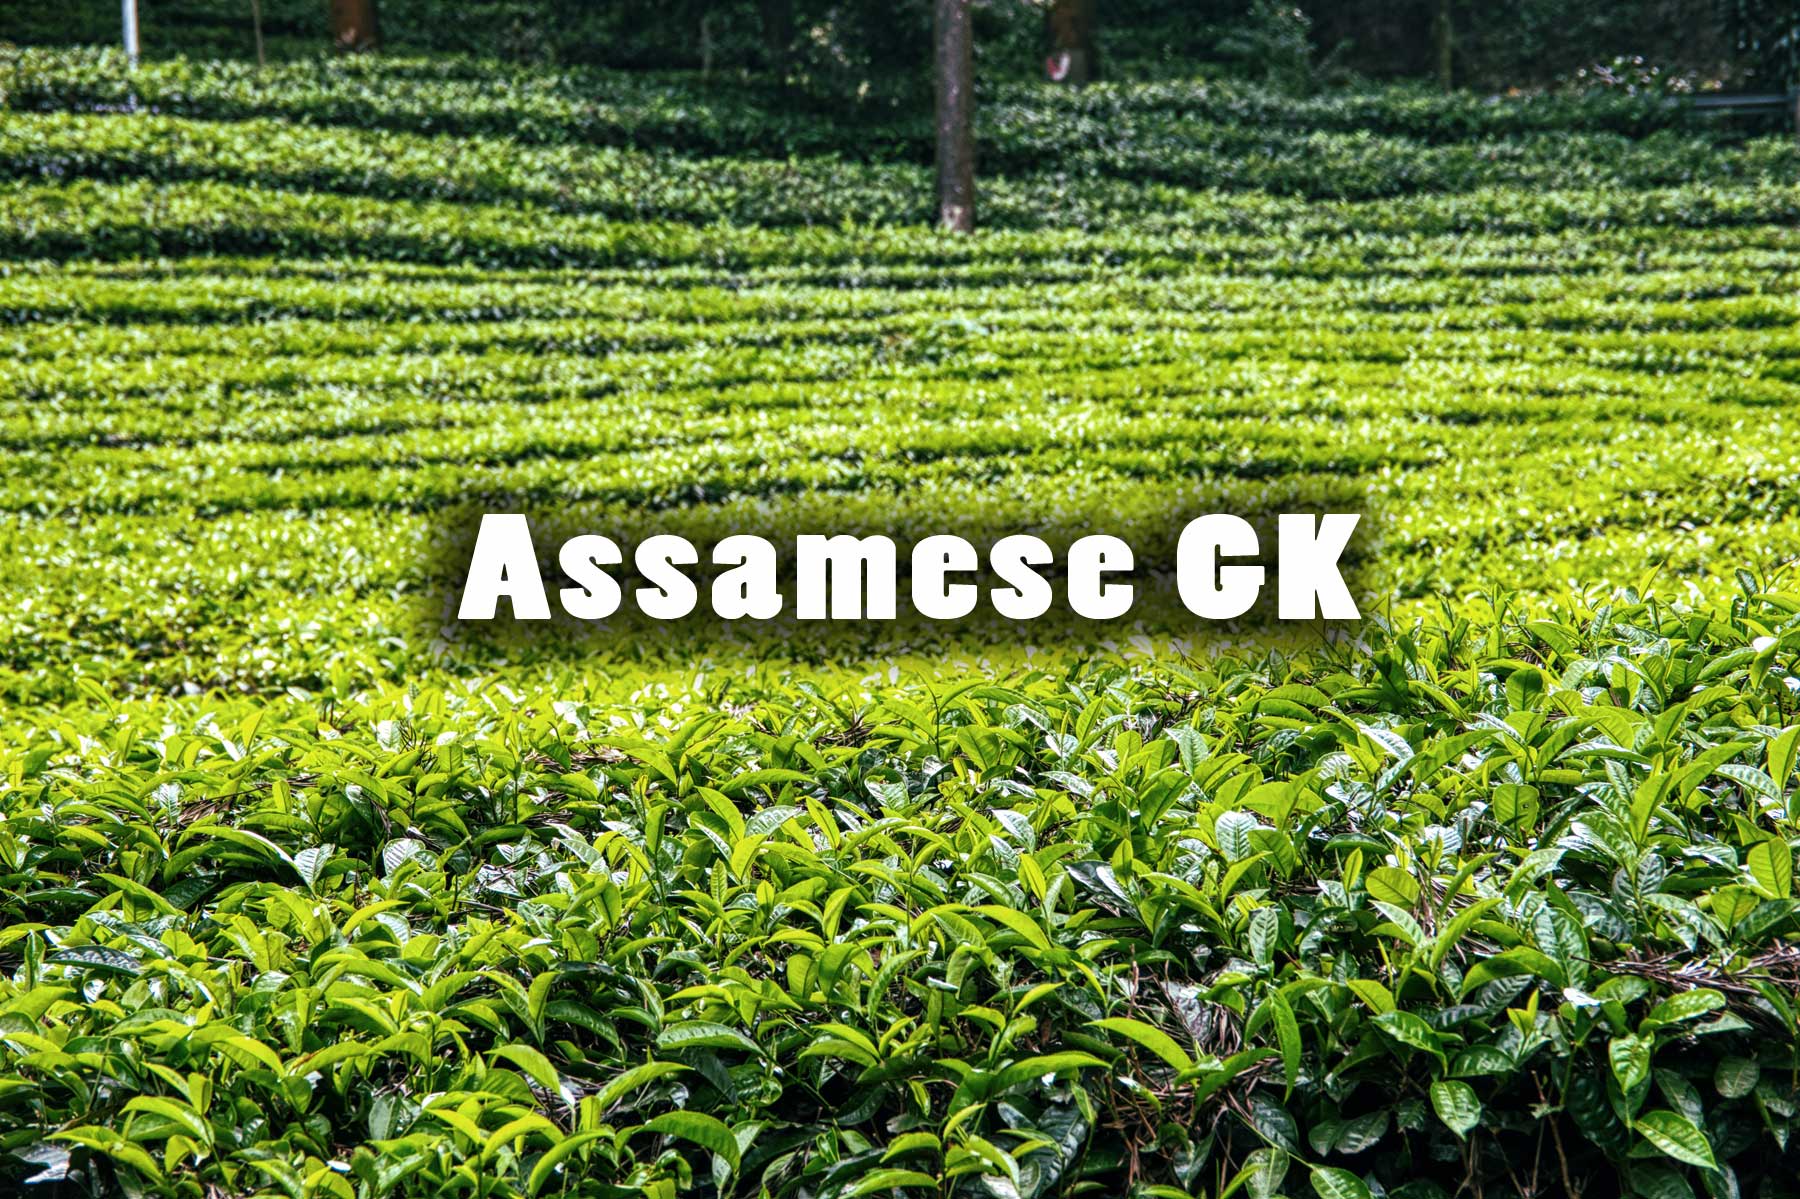 Assamese GK Previous Year Questions and Answers